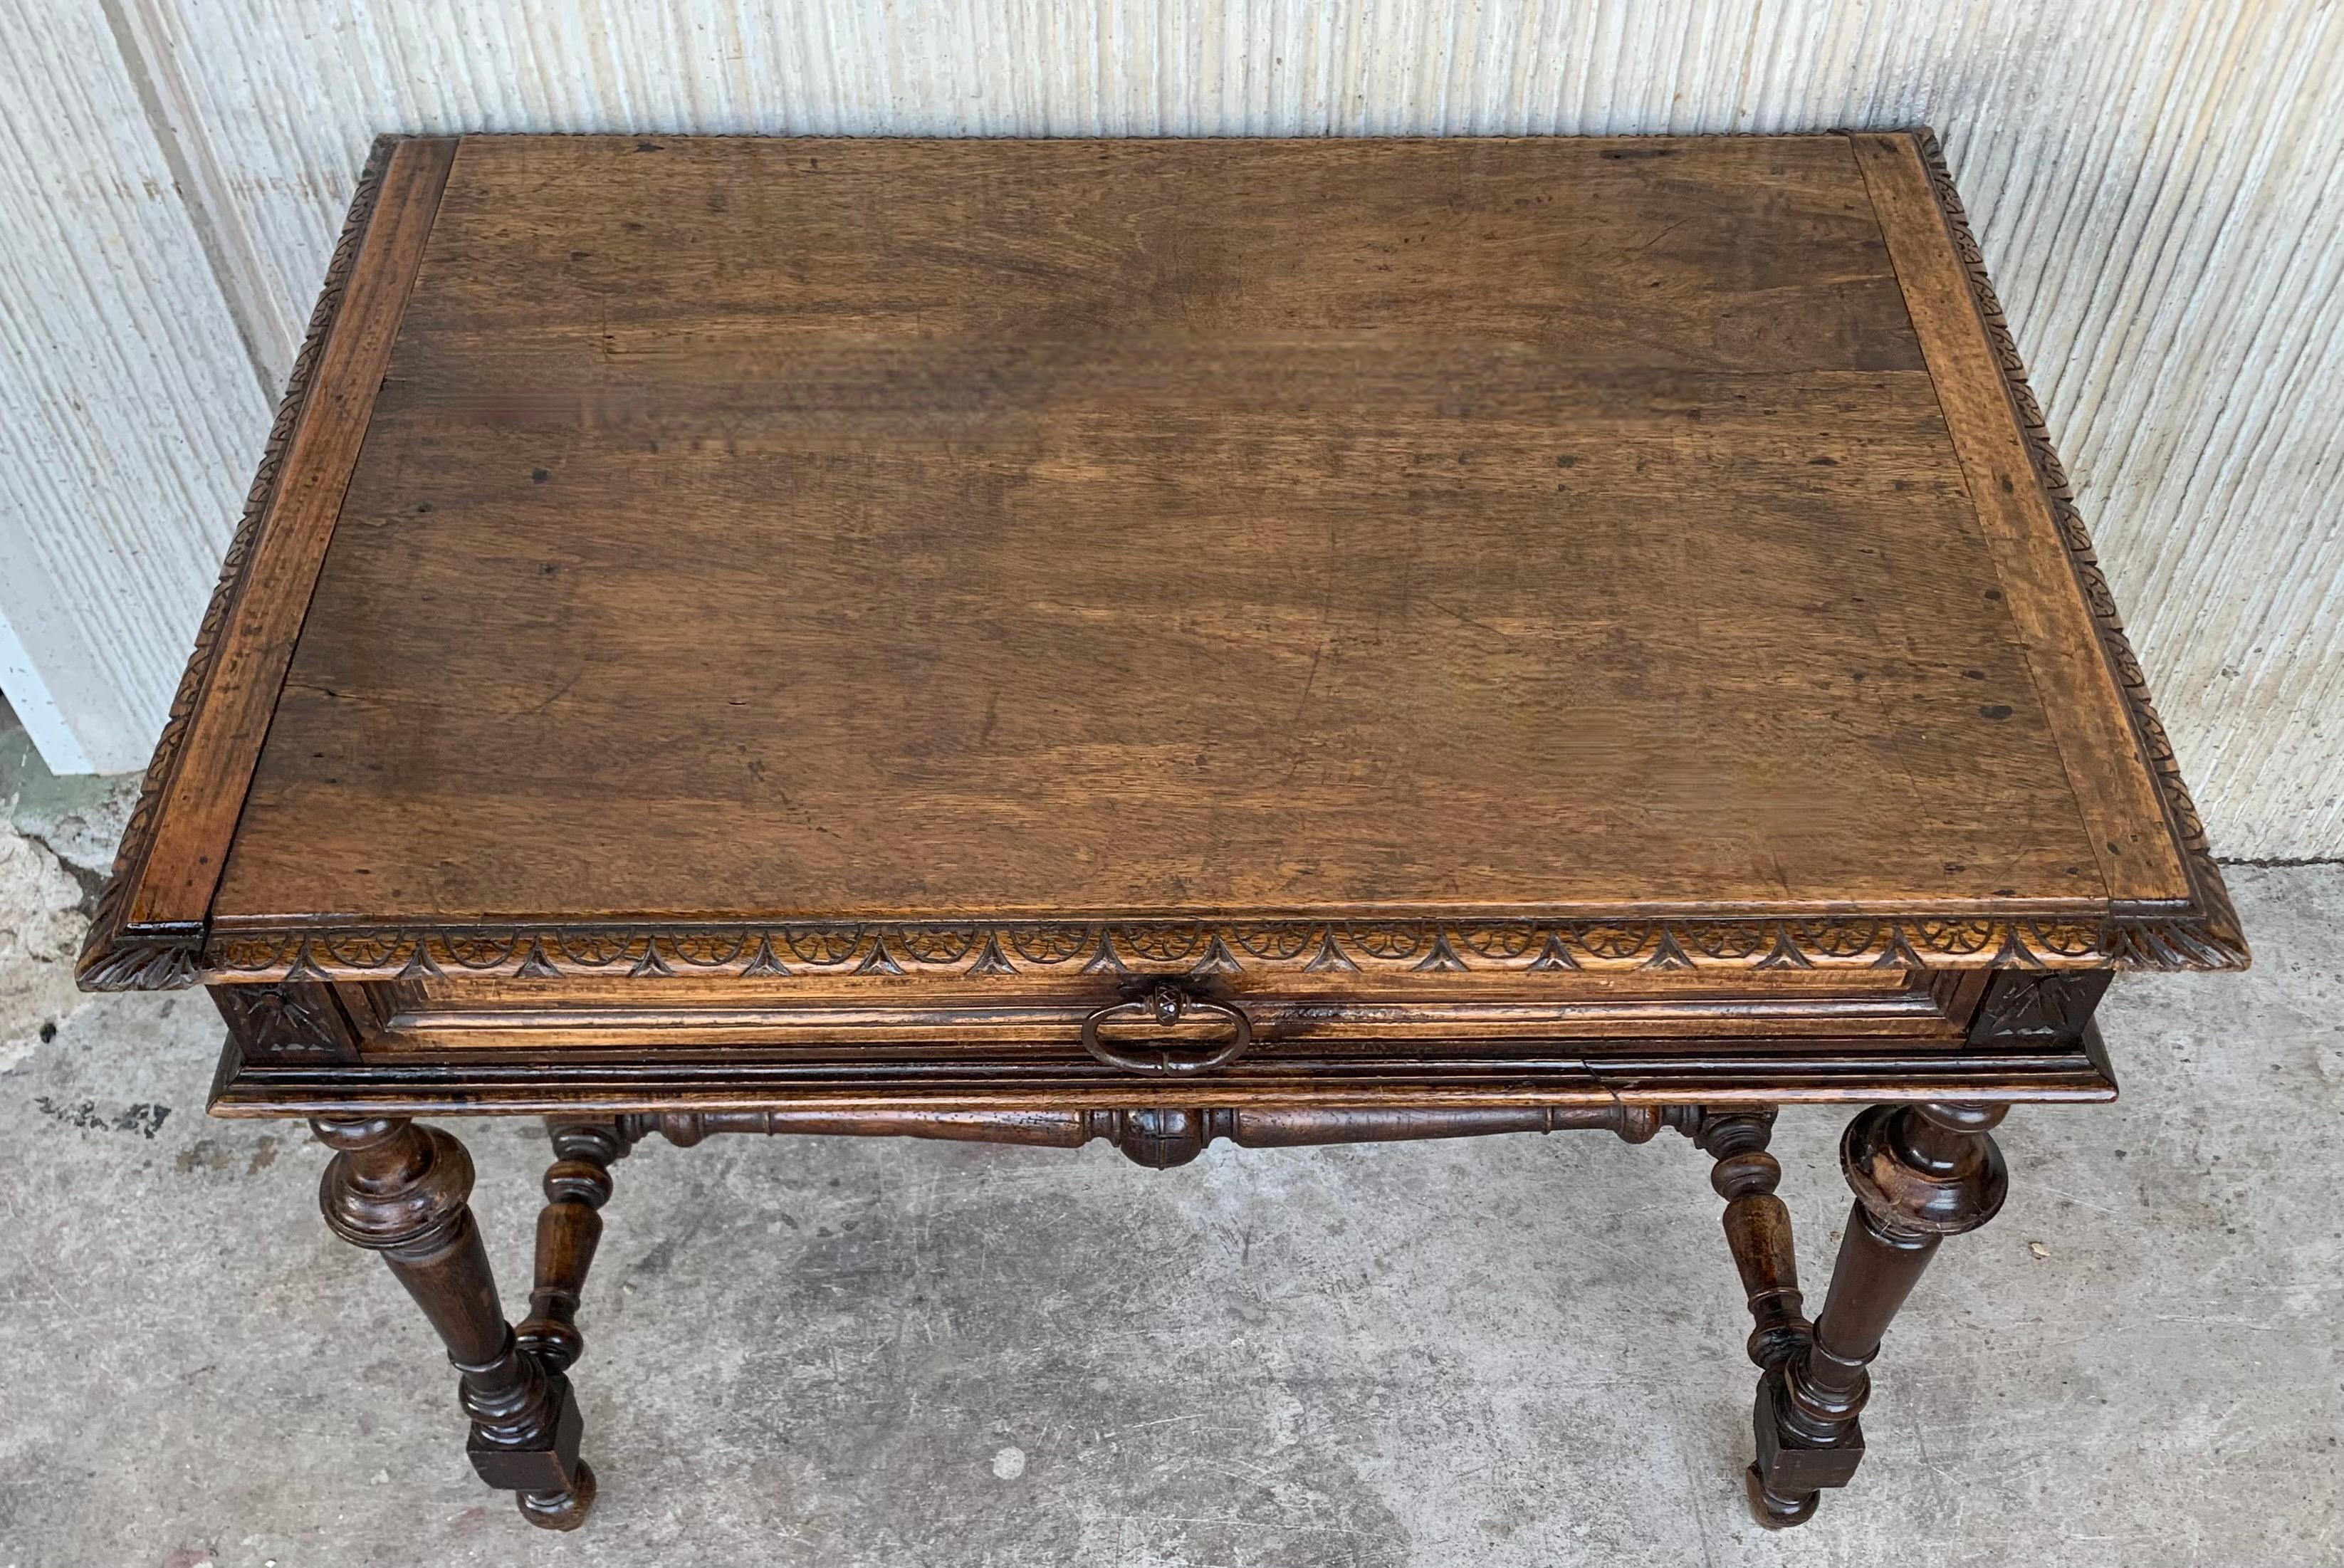 Renaissance 20th Century Spanish Baroque Style Oak Side Table or Center Table with Drawer